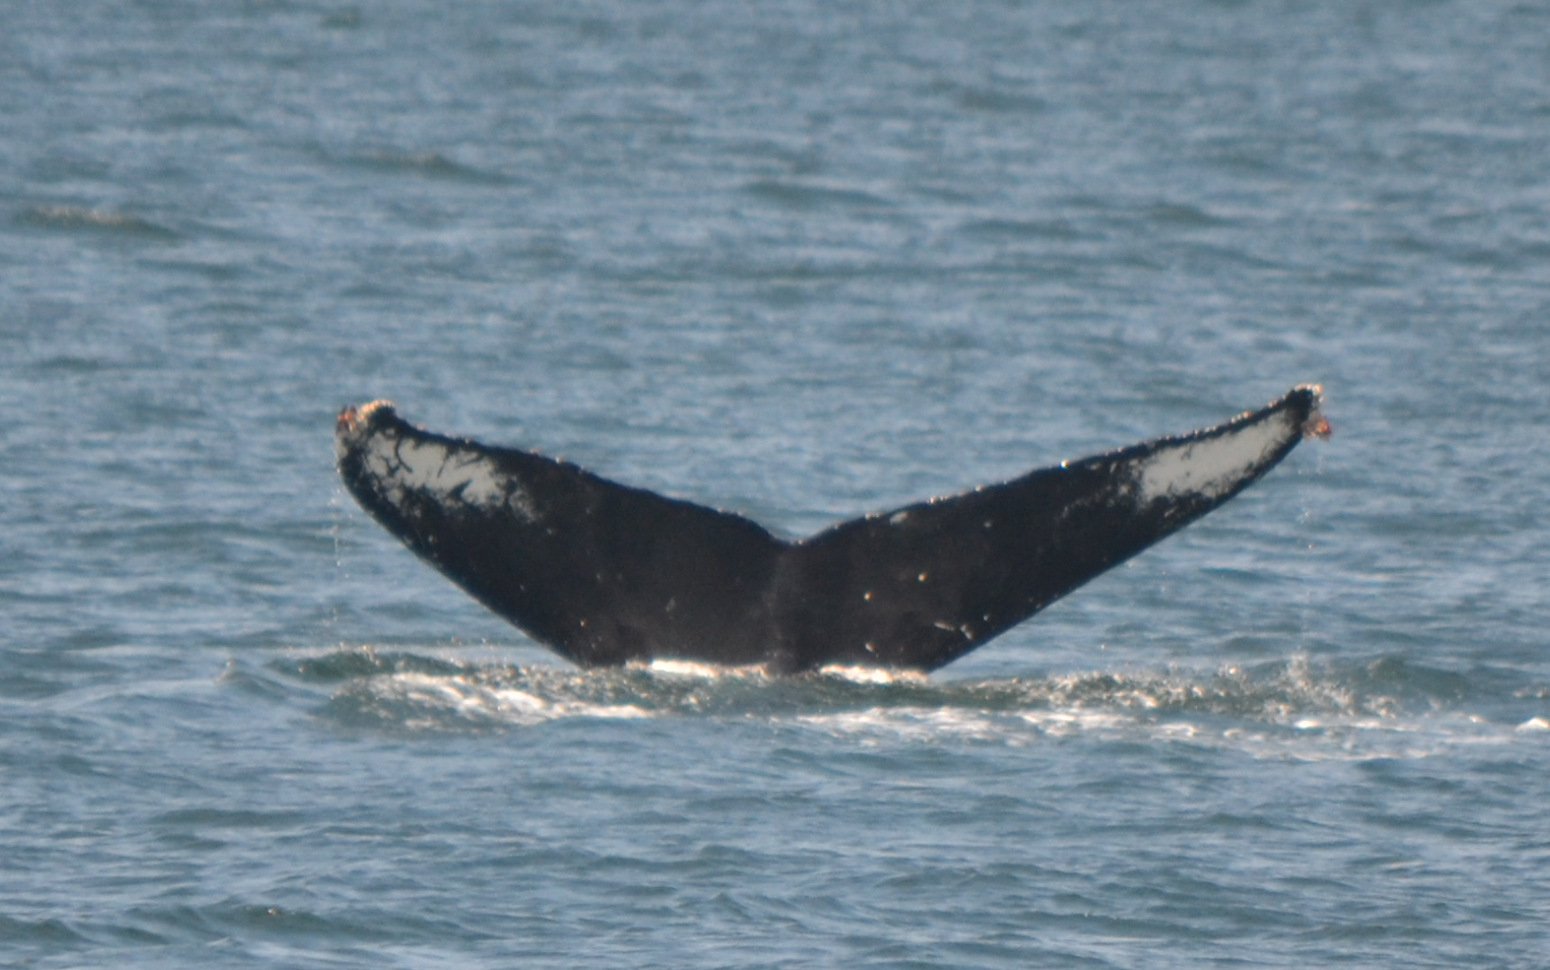 A Once in a Lifetime Whale Watch!